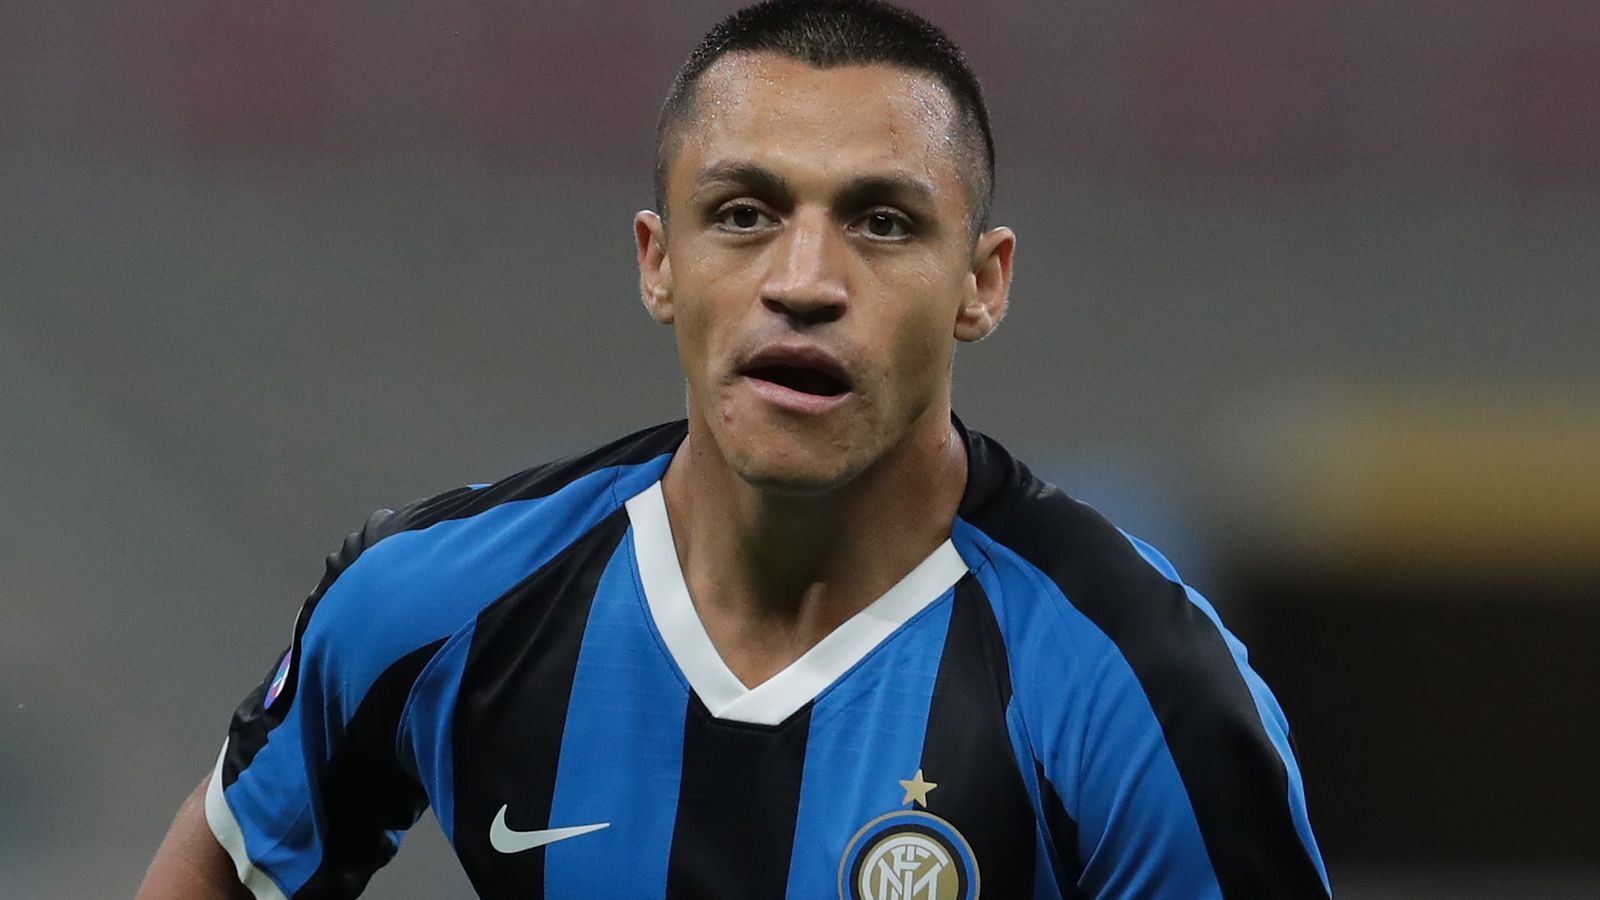 Sanchez’s Contract Extension Confirmed by Inter